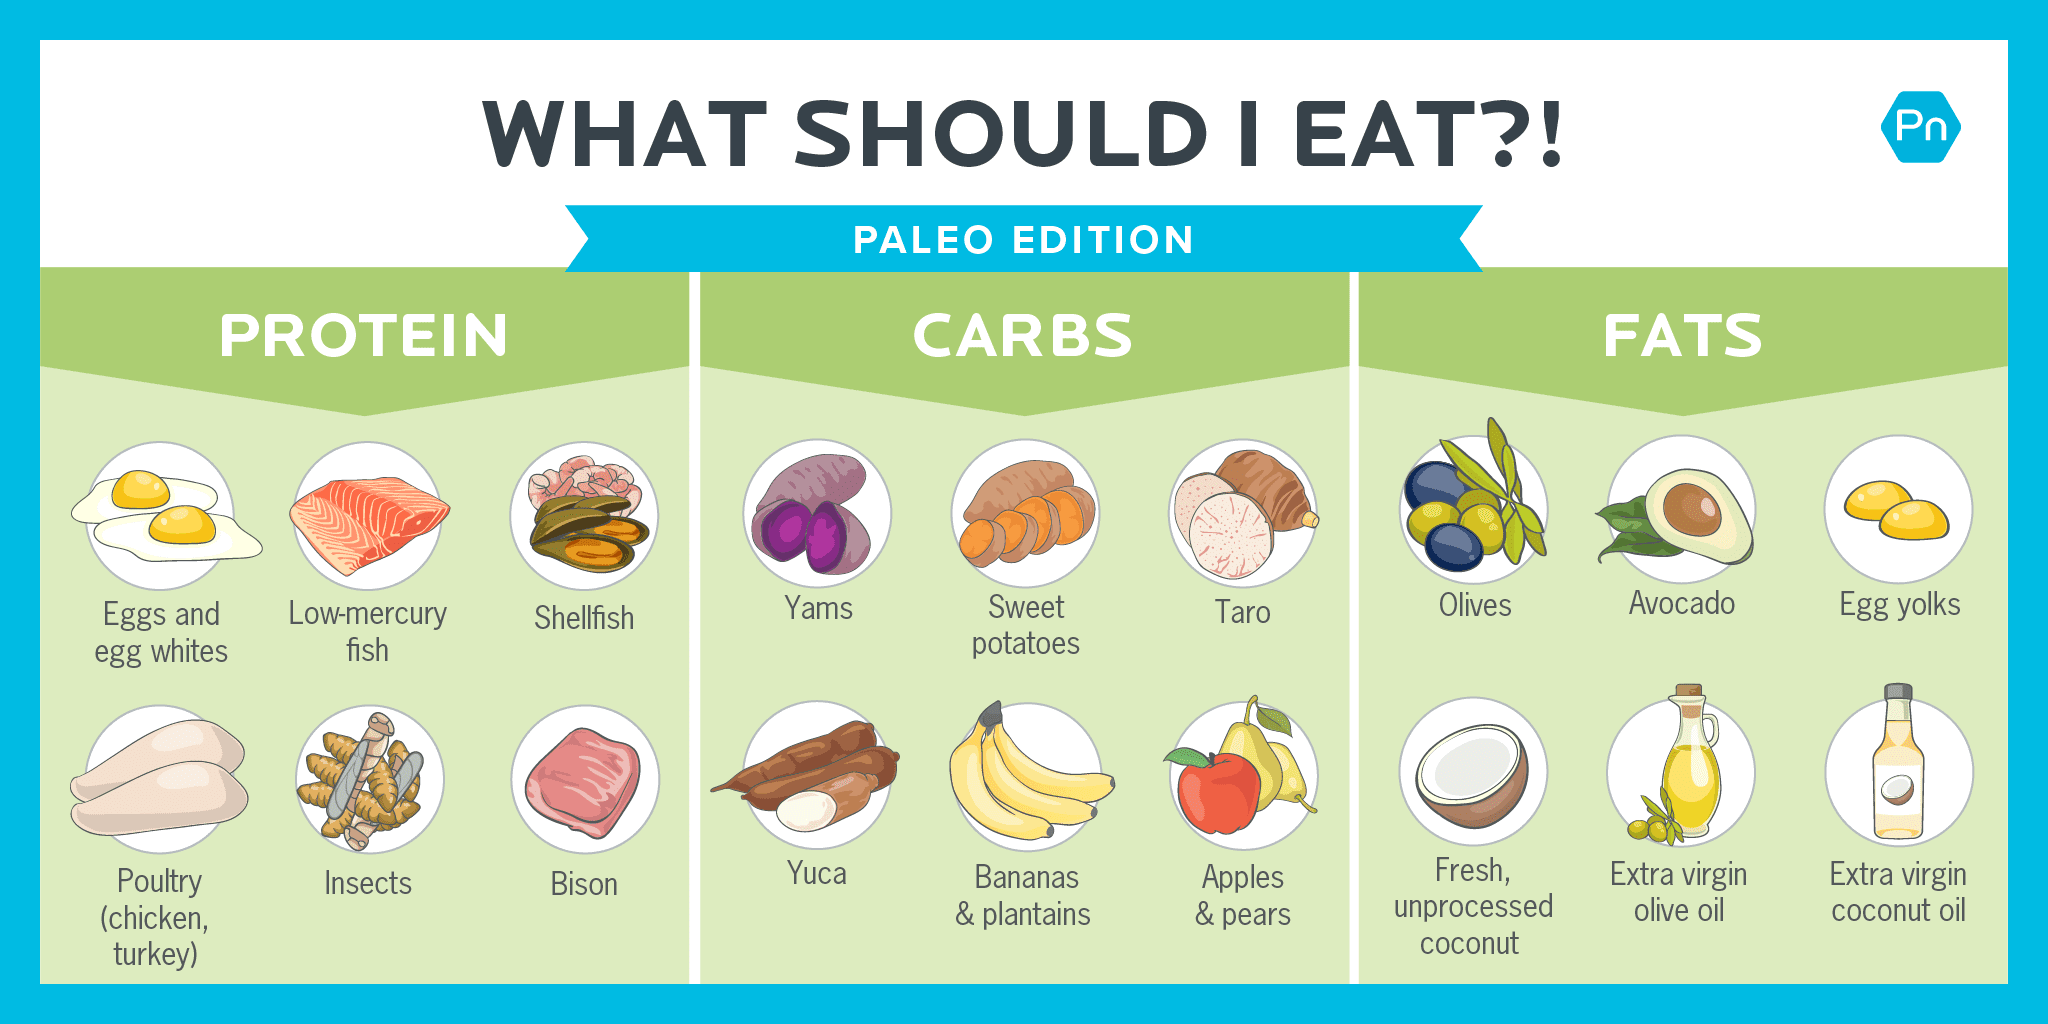 Paleo Diet: Food List, Meal Plan And More – Forbes Health